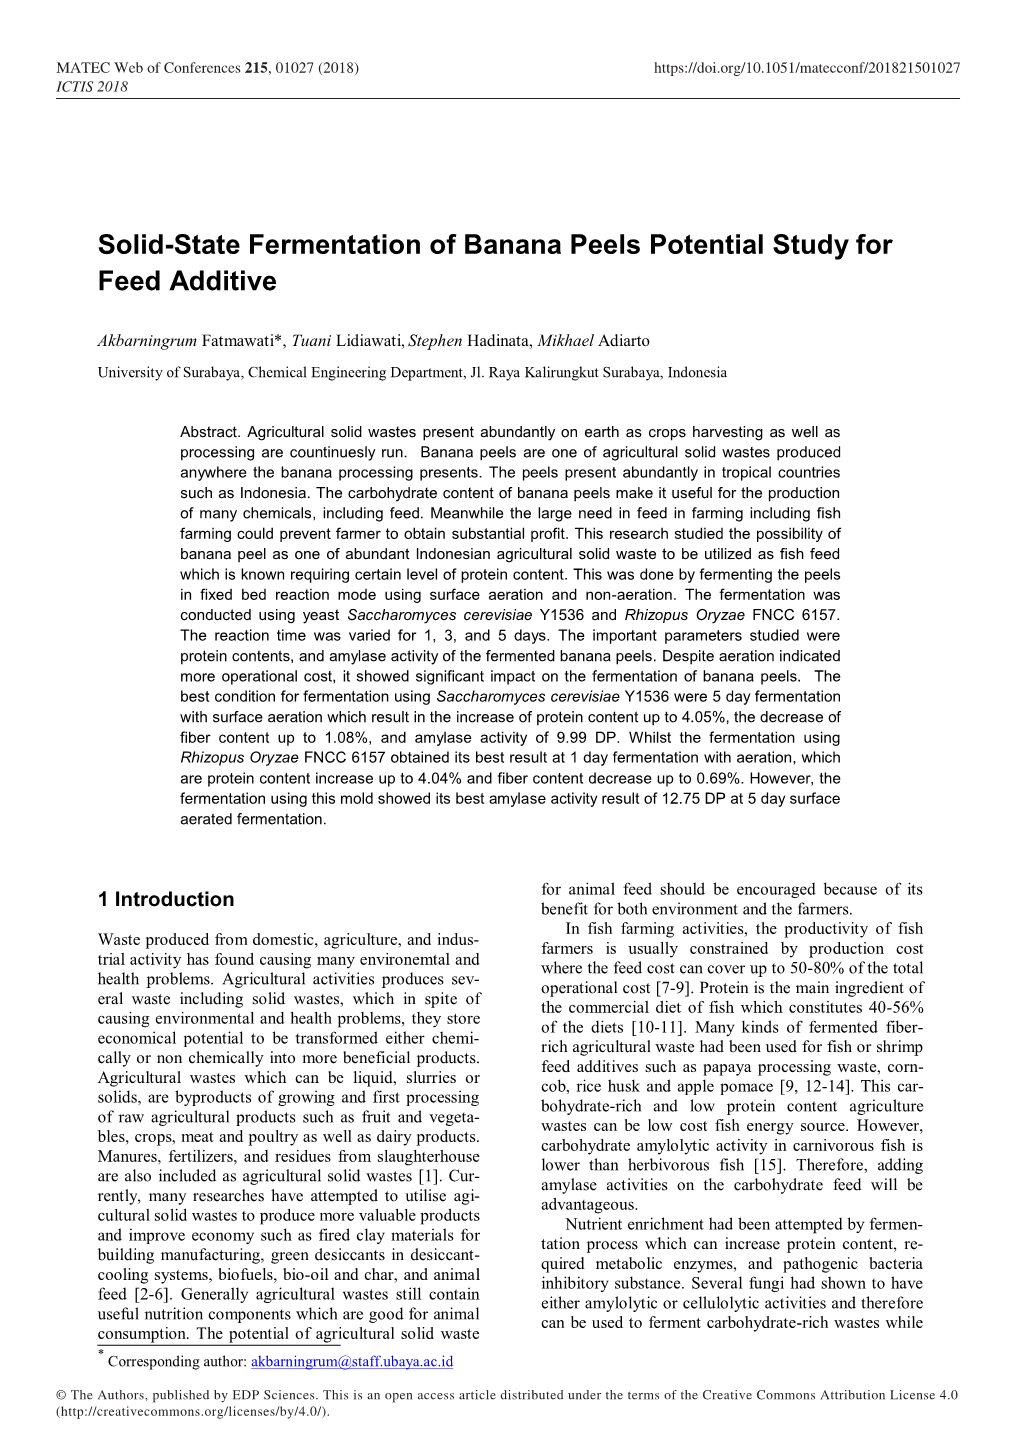 Solid-State Fermentation of Banana Peels Potential Study for Feed Additive